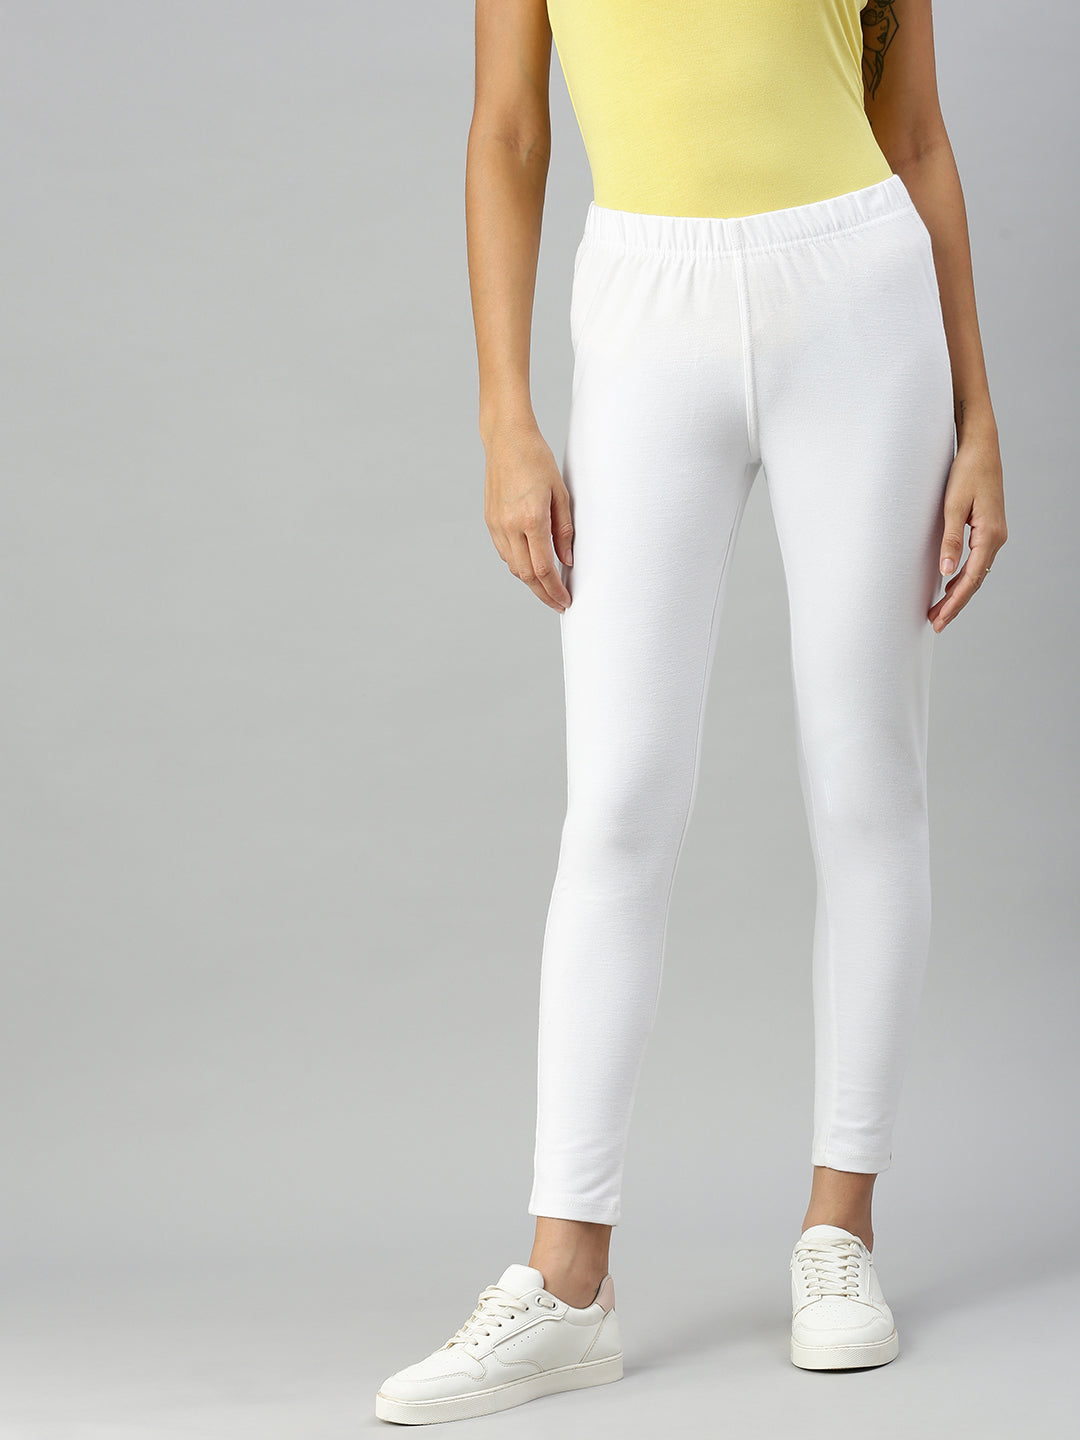 Buy GO COLORS White Womens Stretchable Cotton Jeggings